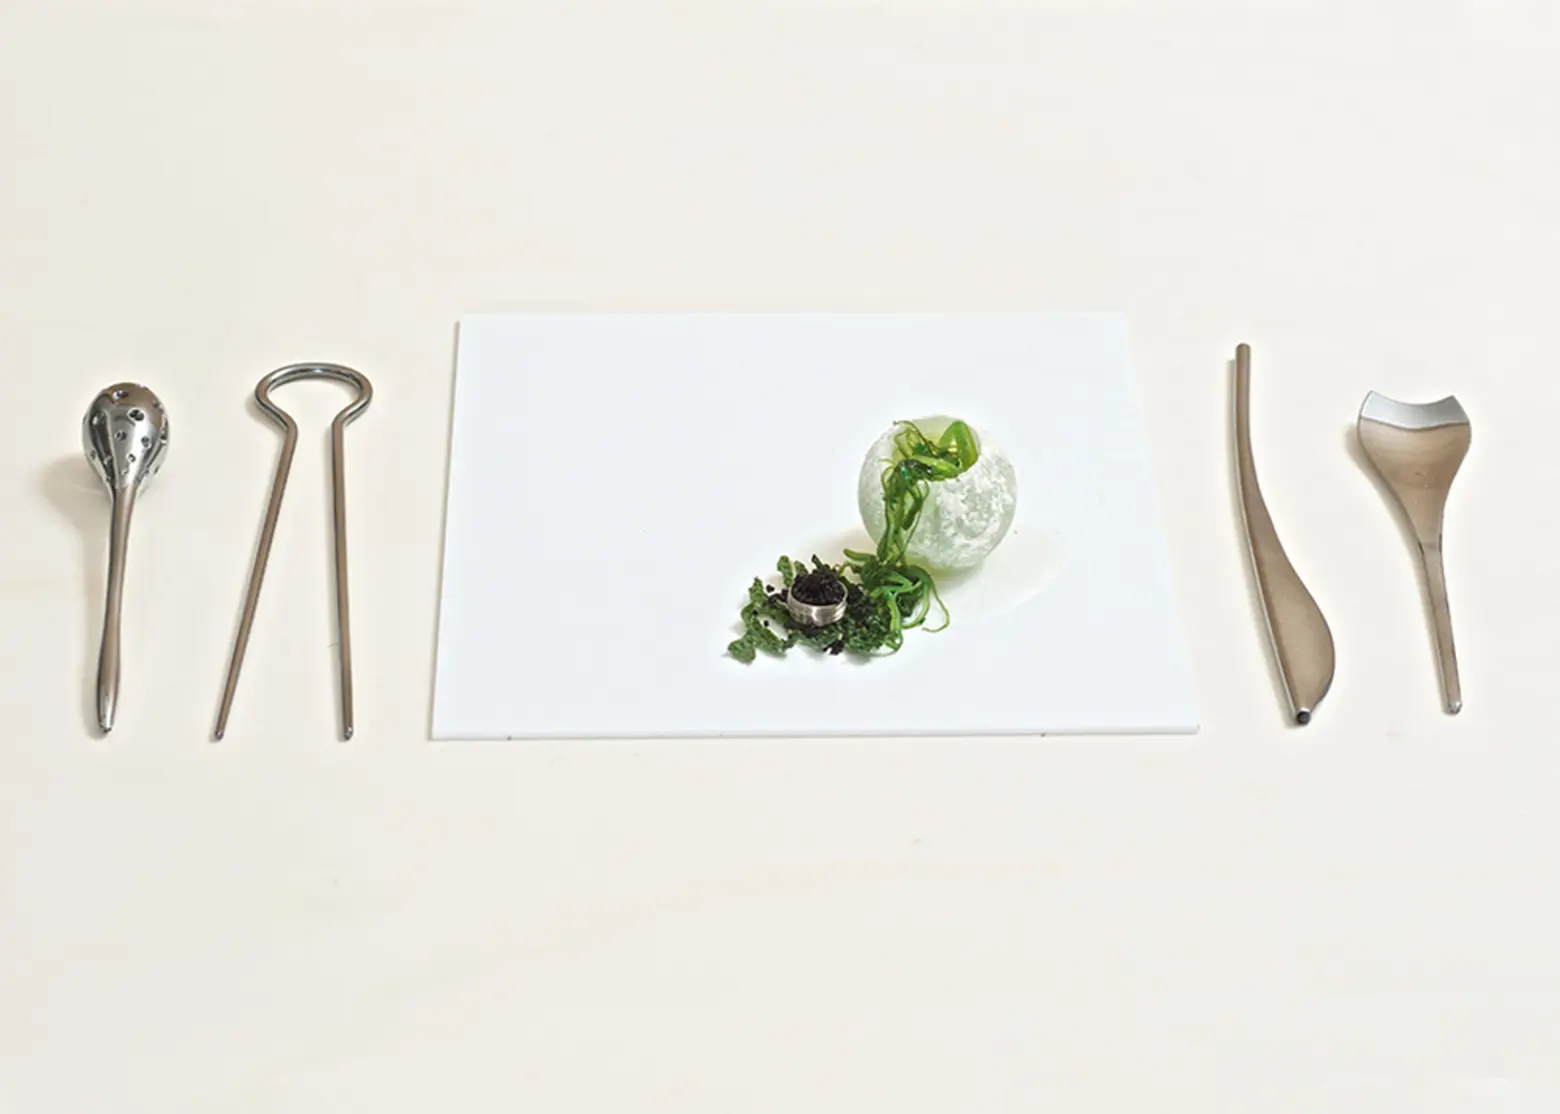 Livin Studio Designs Innovative Fungi Cutlery for Eating Their Futuristic Sustainable Food